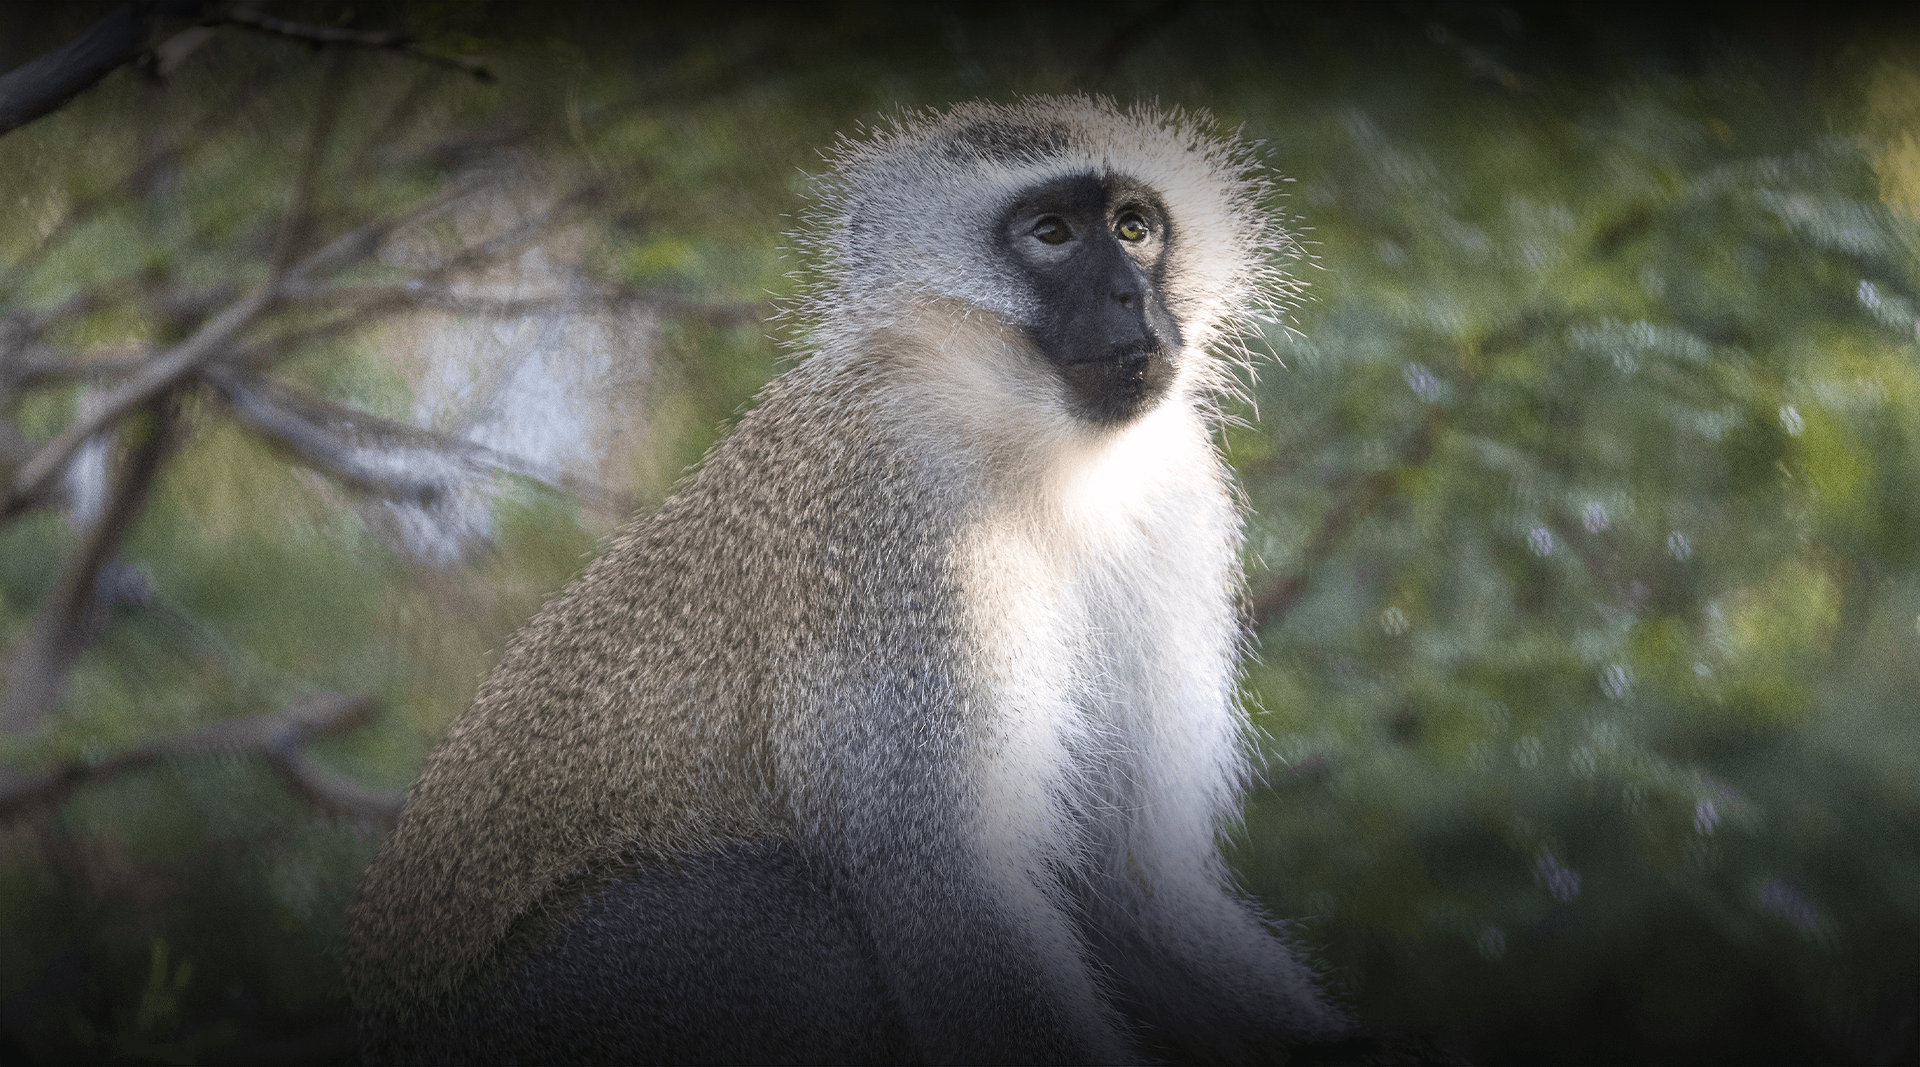 Vervet monkey stands and looks right